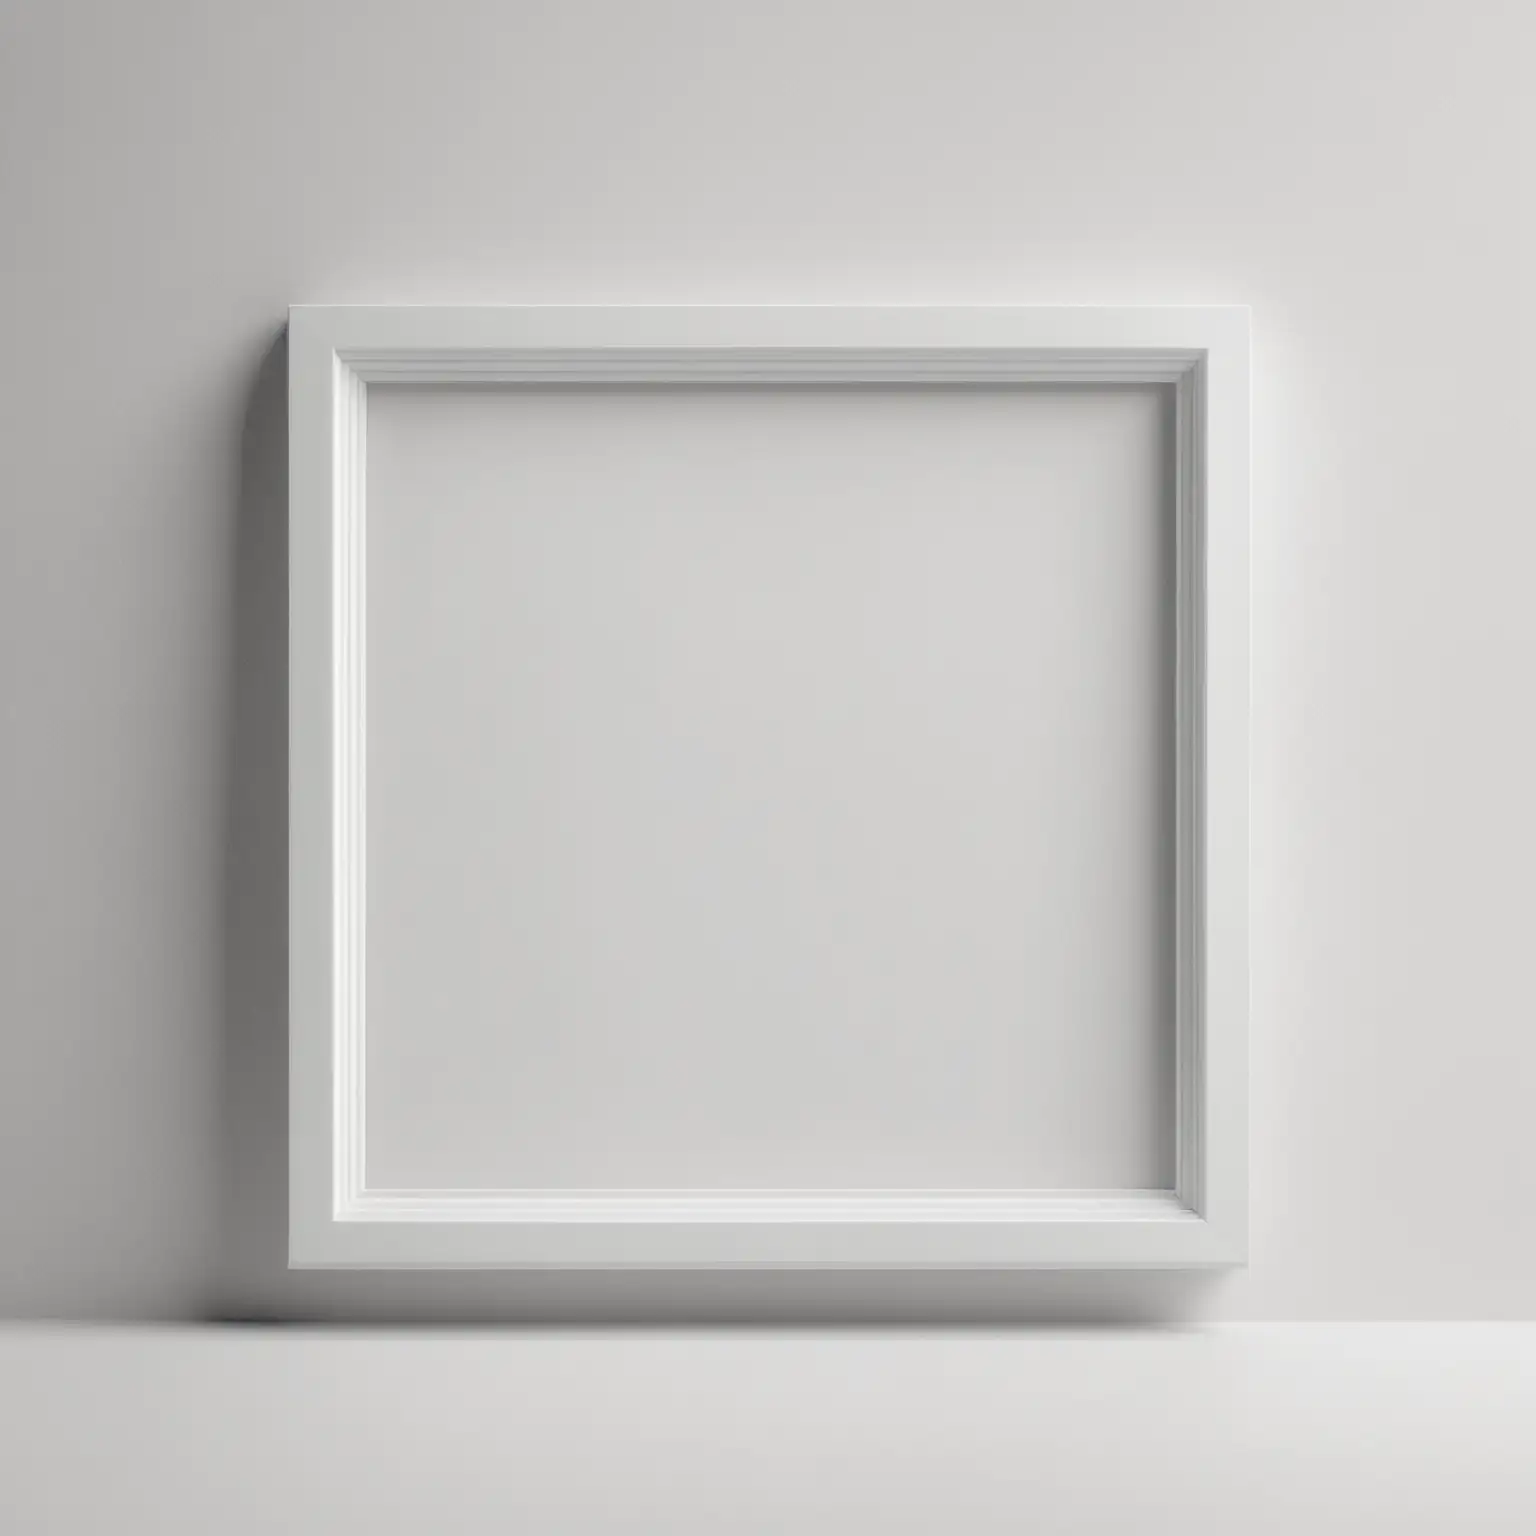 Artisan-Crafted-White-Square-Photo-Frame-in-HighResolution-Studio-Setting